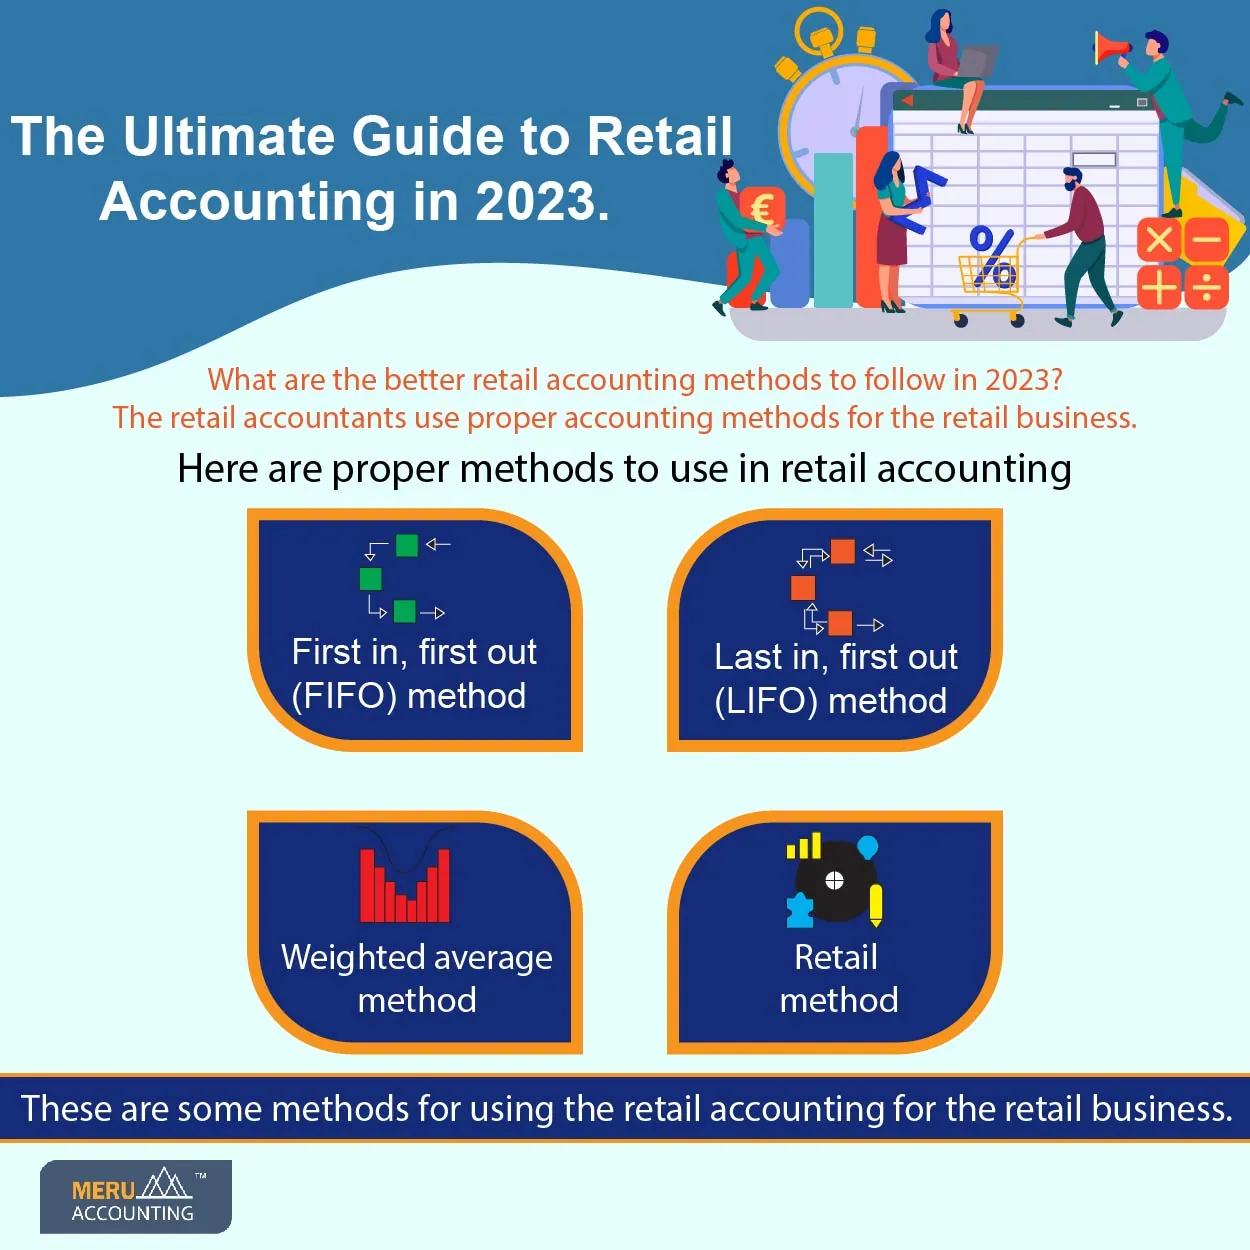 retail accounting>
<br>

<p>The four common costing methods used are:</p>

<h3>1. First in, first out (FIFO)</h3>

<p>In FIFO method, the costing of the first order is considered then the revenue gained is compared with it and that revenue is assigned to the cost of goods sold. This method is a proper solution in the costing method for the inventory.</p>

<h3>2. Last in, first out (LIFO)</h3>

<p>When you have a Last in, First out (LIFO) system like a bucket, then it makes sense that the most recently put item will be on top and sold first. Here, the first order cost of the goods sold is considered giving proper costing.</p>

<h3>3. Weighted average</h3>

<p>In some cases, the items which are older and newer get mixed-up and it is difficult to estimate the cost of the exact item sold. So, here we can go with the weighted average order costing method to provide proper costing.</p>

<h3>4. Retail method</h3>

<p>The retail method is different from the previous types of the method where the costing is based on the retail price. It avoids other complicated aspects like cost matching, physical count, etc. This method can be very implemented for the retail business.</p>

<p>These are some general costing method solutions for the retail business accounting which the <strong>Retail Accountants</strong> can use.</p>

<h2>General Accounting Cycle For Retail Stores:</h2>

<p>- Recording of all the transactions.<br />
- Generating the financial statements.<br />
- Reconciliation of all the transactions.</p>

<p><br />
During all the accounting transactions, proper adjustments can be made wherever necessary. So, it is easy to<a  data-cke-saved-href=